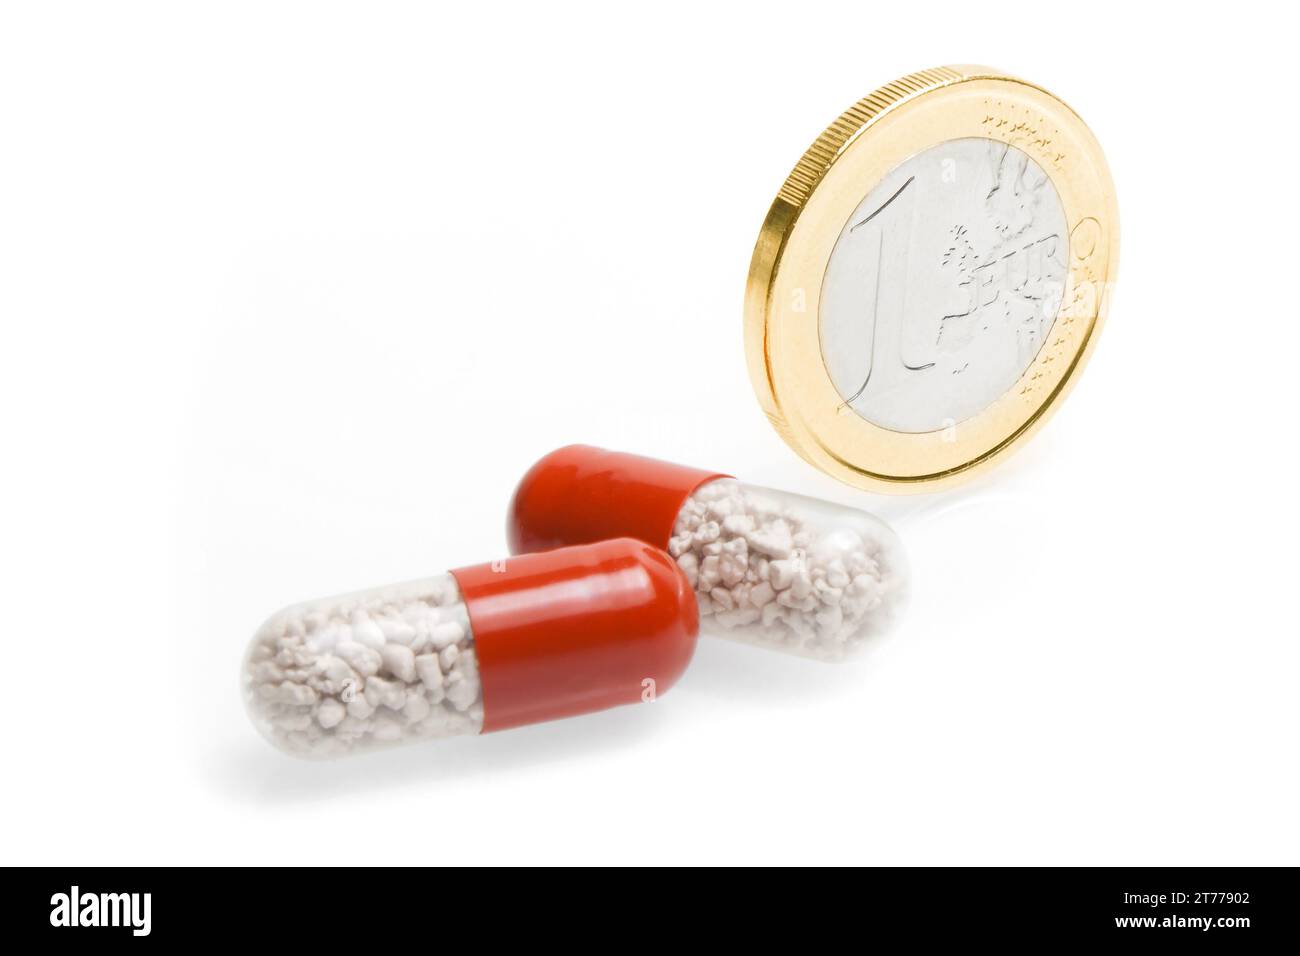 euro coin and medical pills on white background Stock Photo